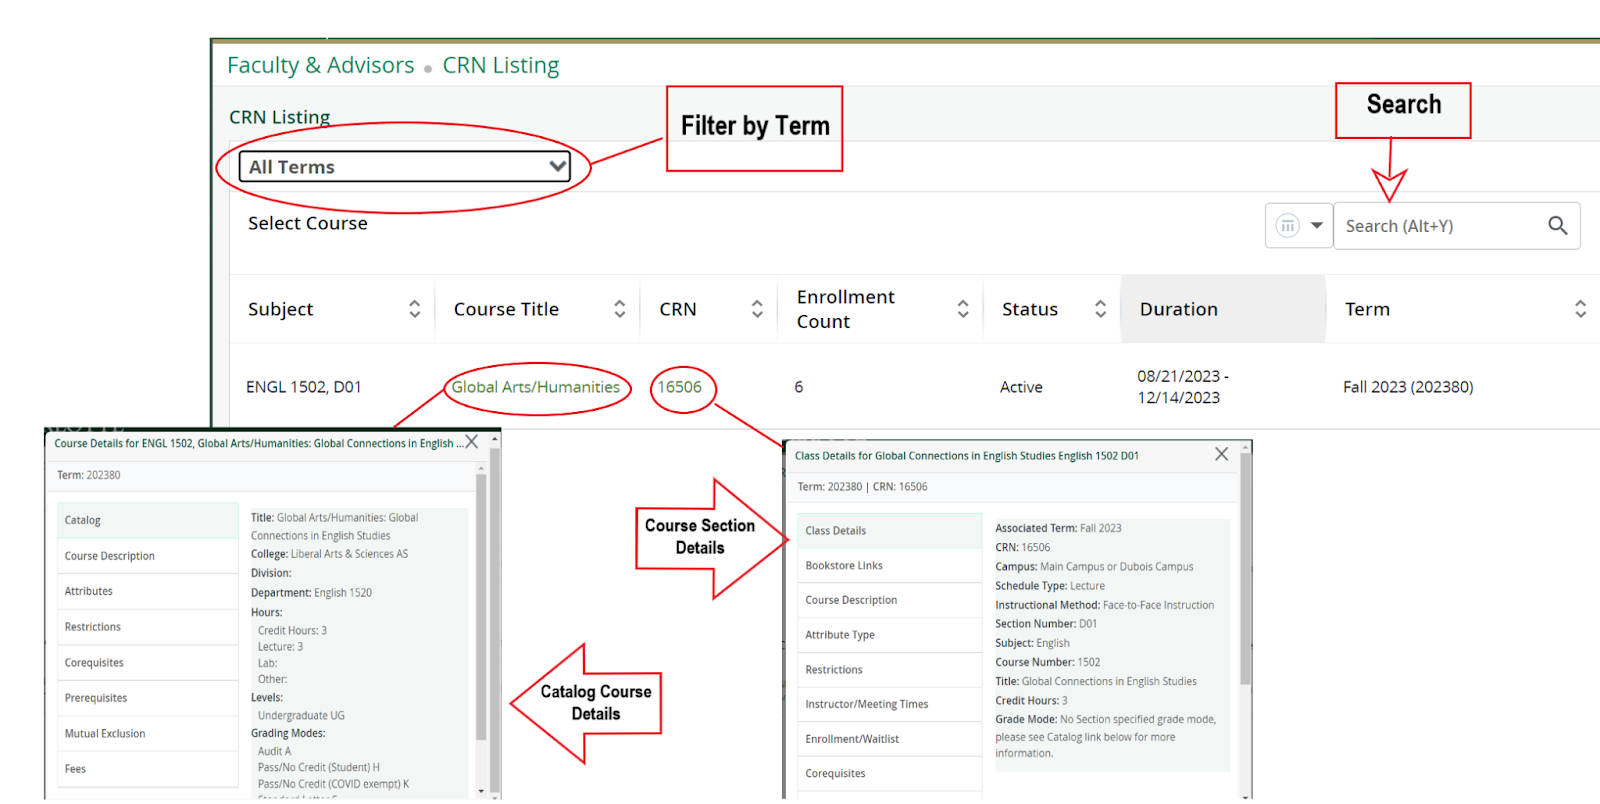 CRN Listing showing filter by term, search, catalog course details, and course selection details